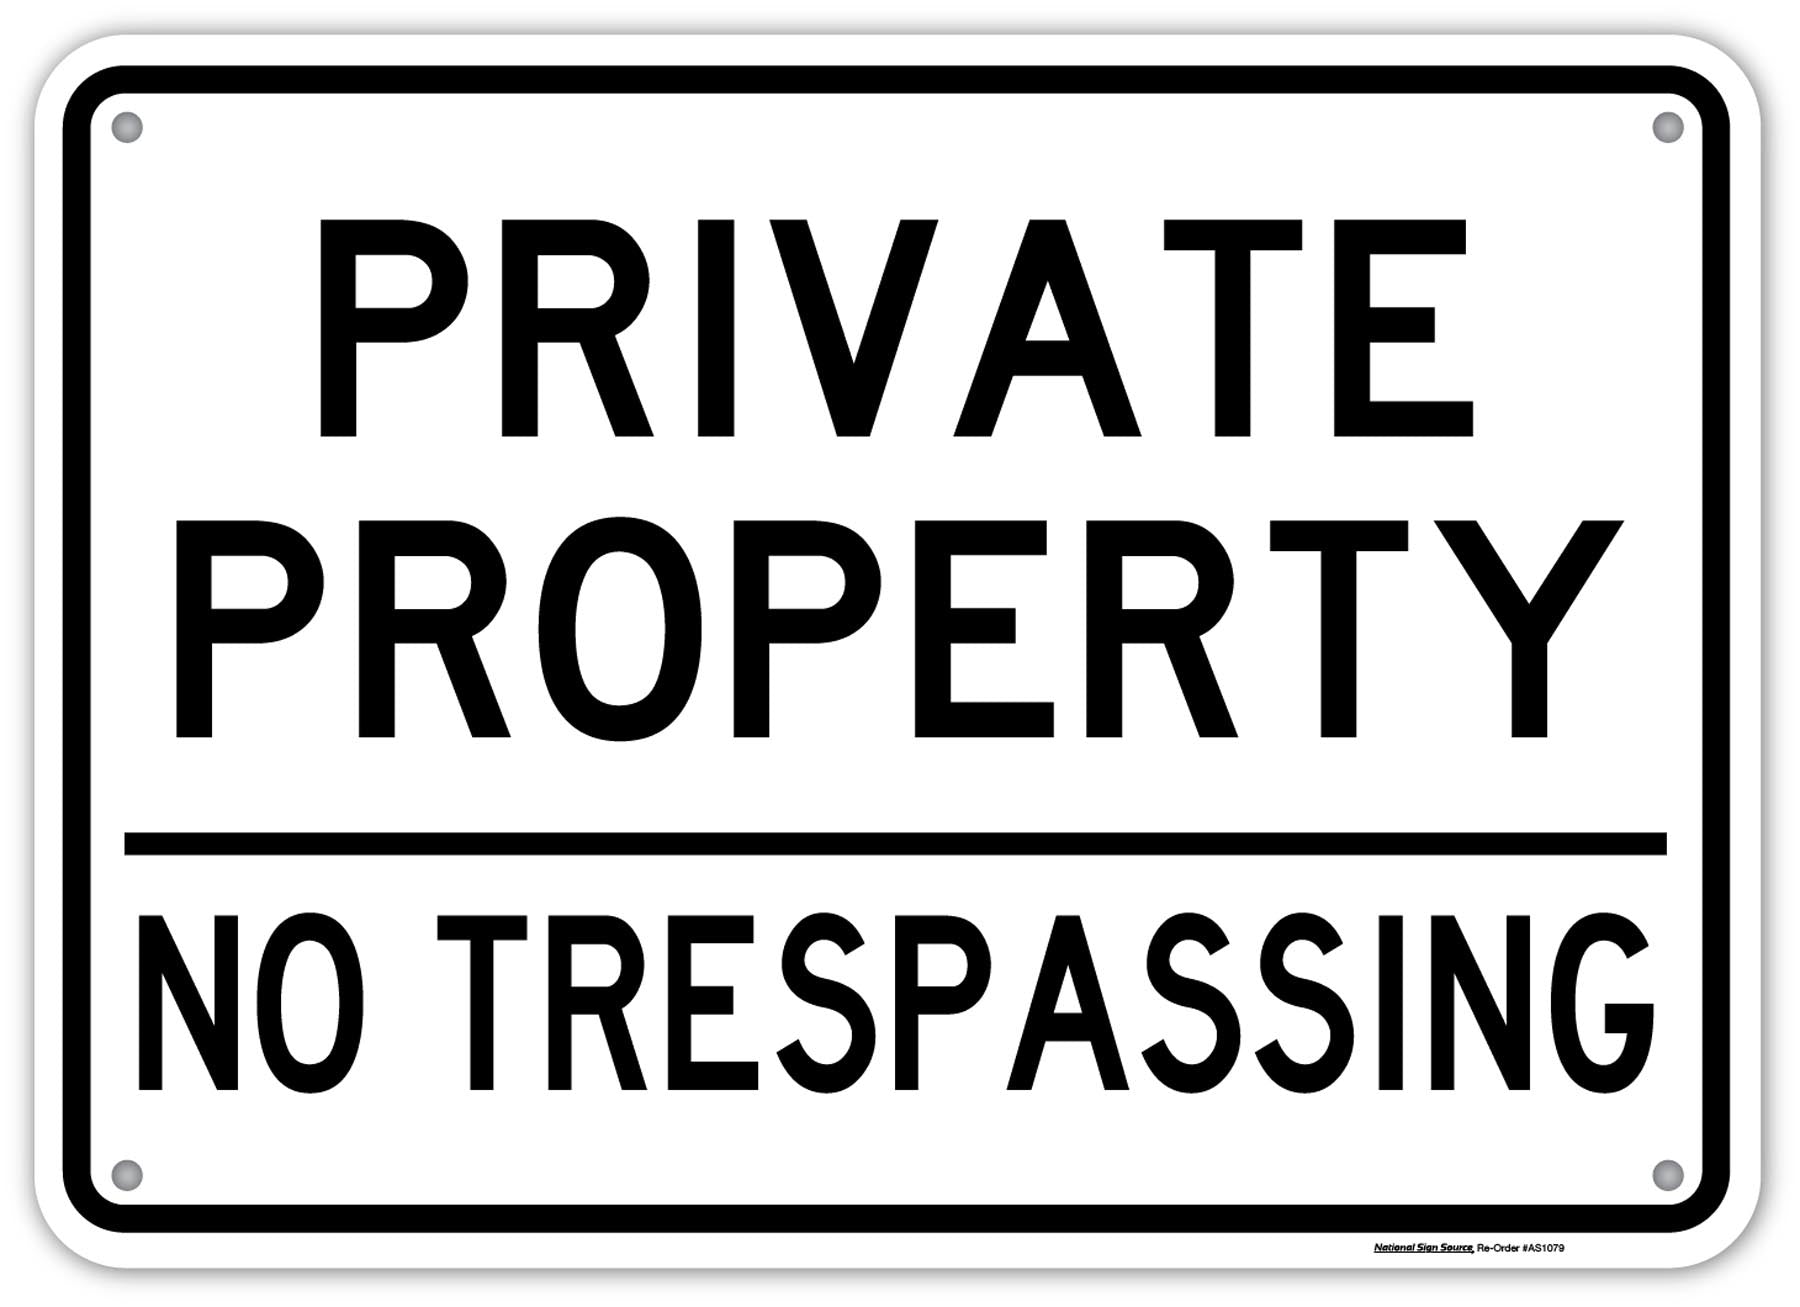 Private property sign, no trespassing sign that reads, "PRIVATE PROPERTY, NO TRESPASSING."  Aluminum sign or vinyl stickers.